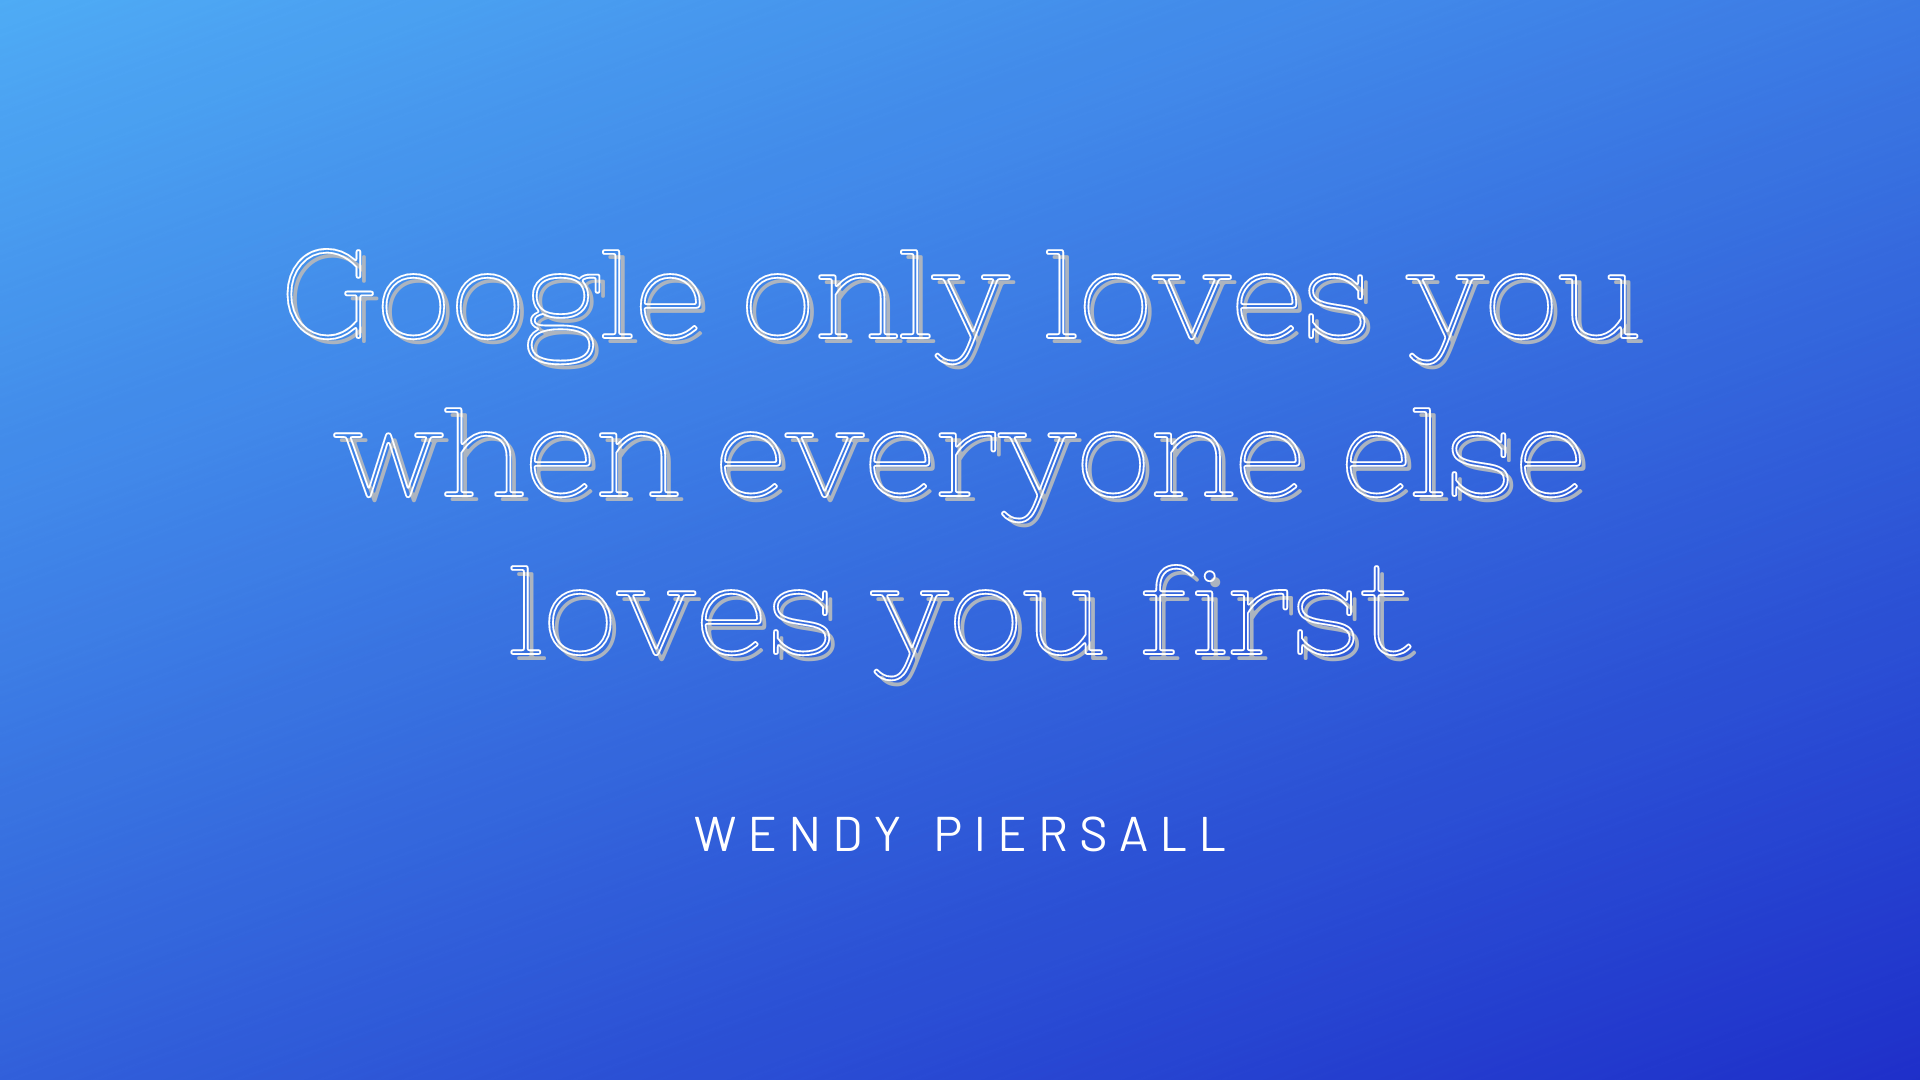 SEO quote by Wendy Piersall